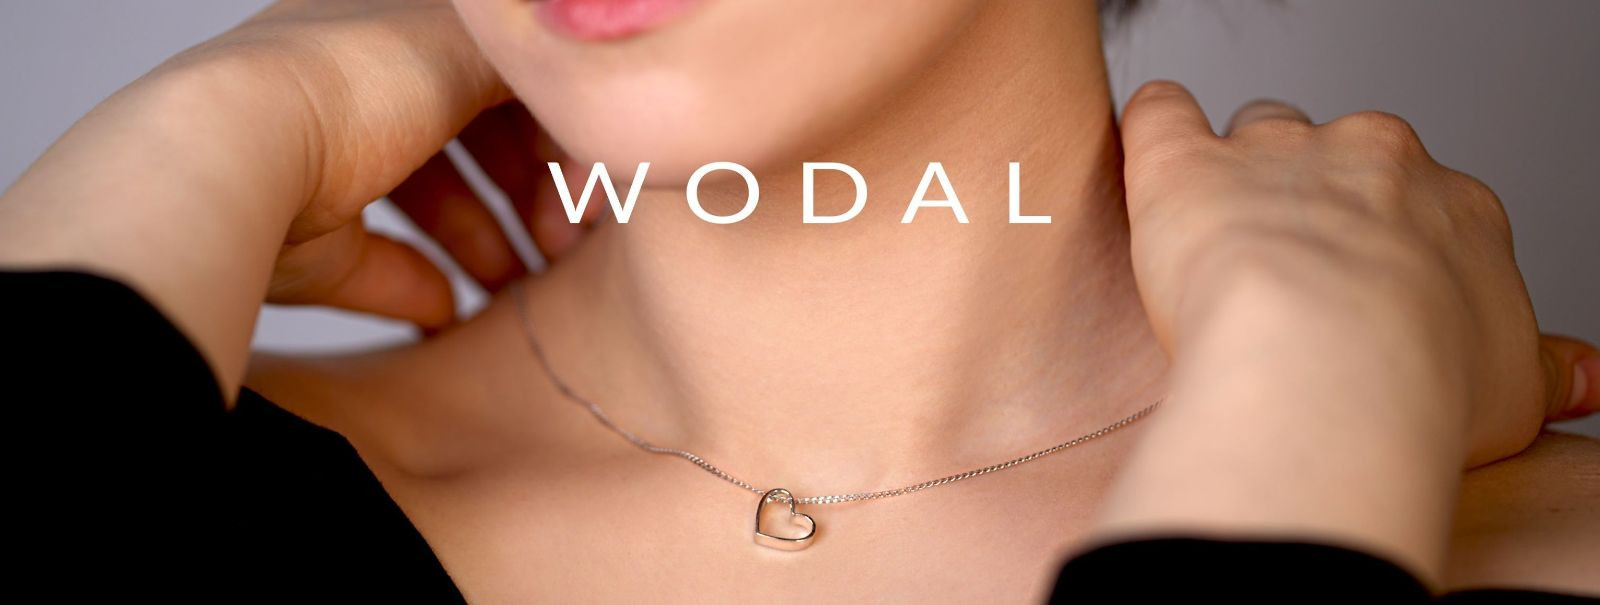 At WODAL DESIGNS OÜ, we believe that true elegance lies in simplicity. Our carefully curated collection of gold vermeil, rose gold vermeil, platinum vermeil, an